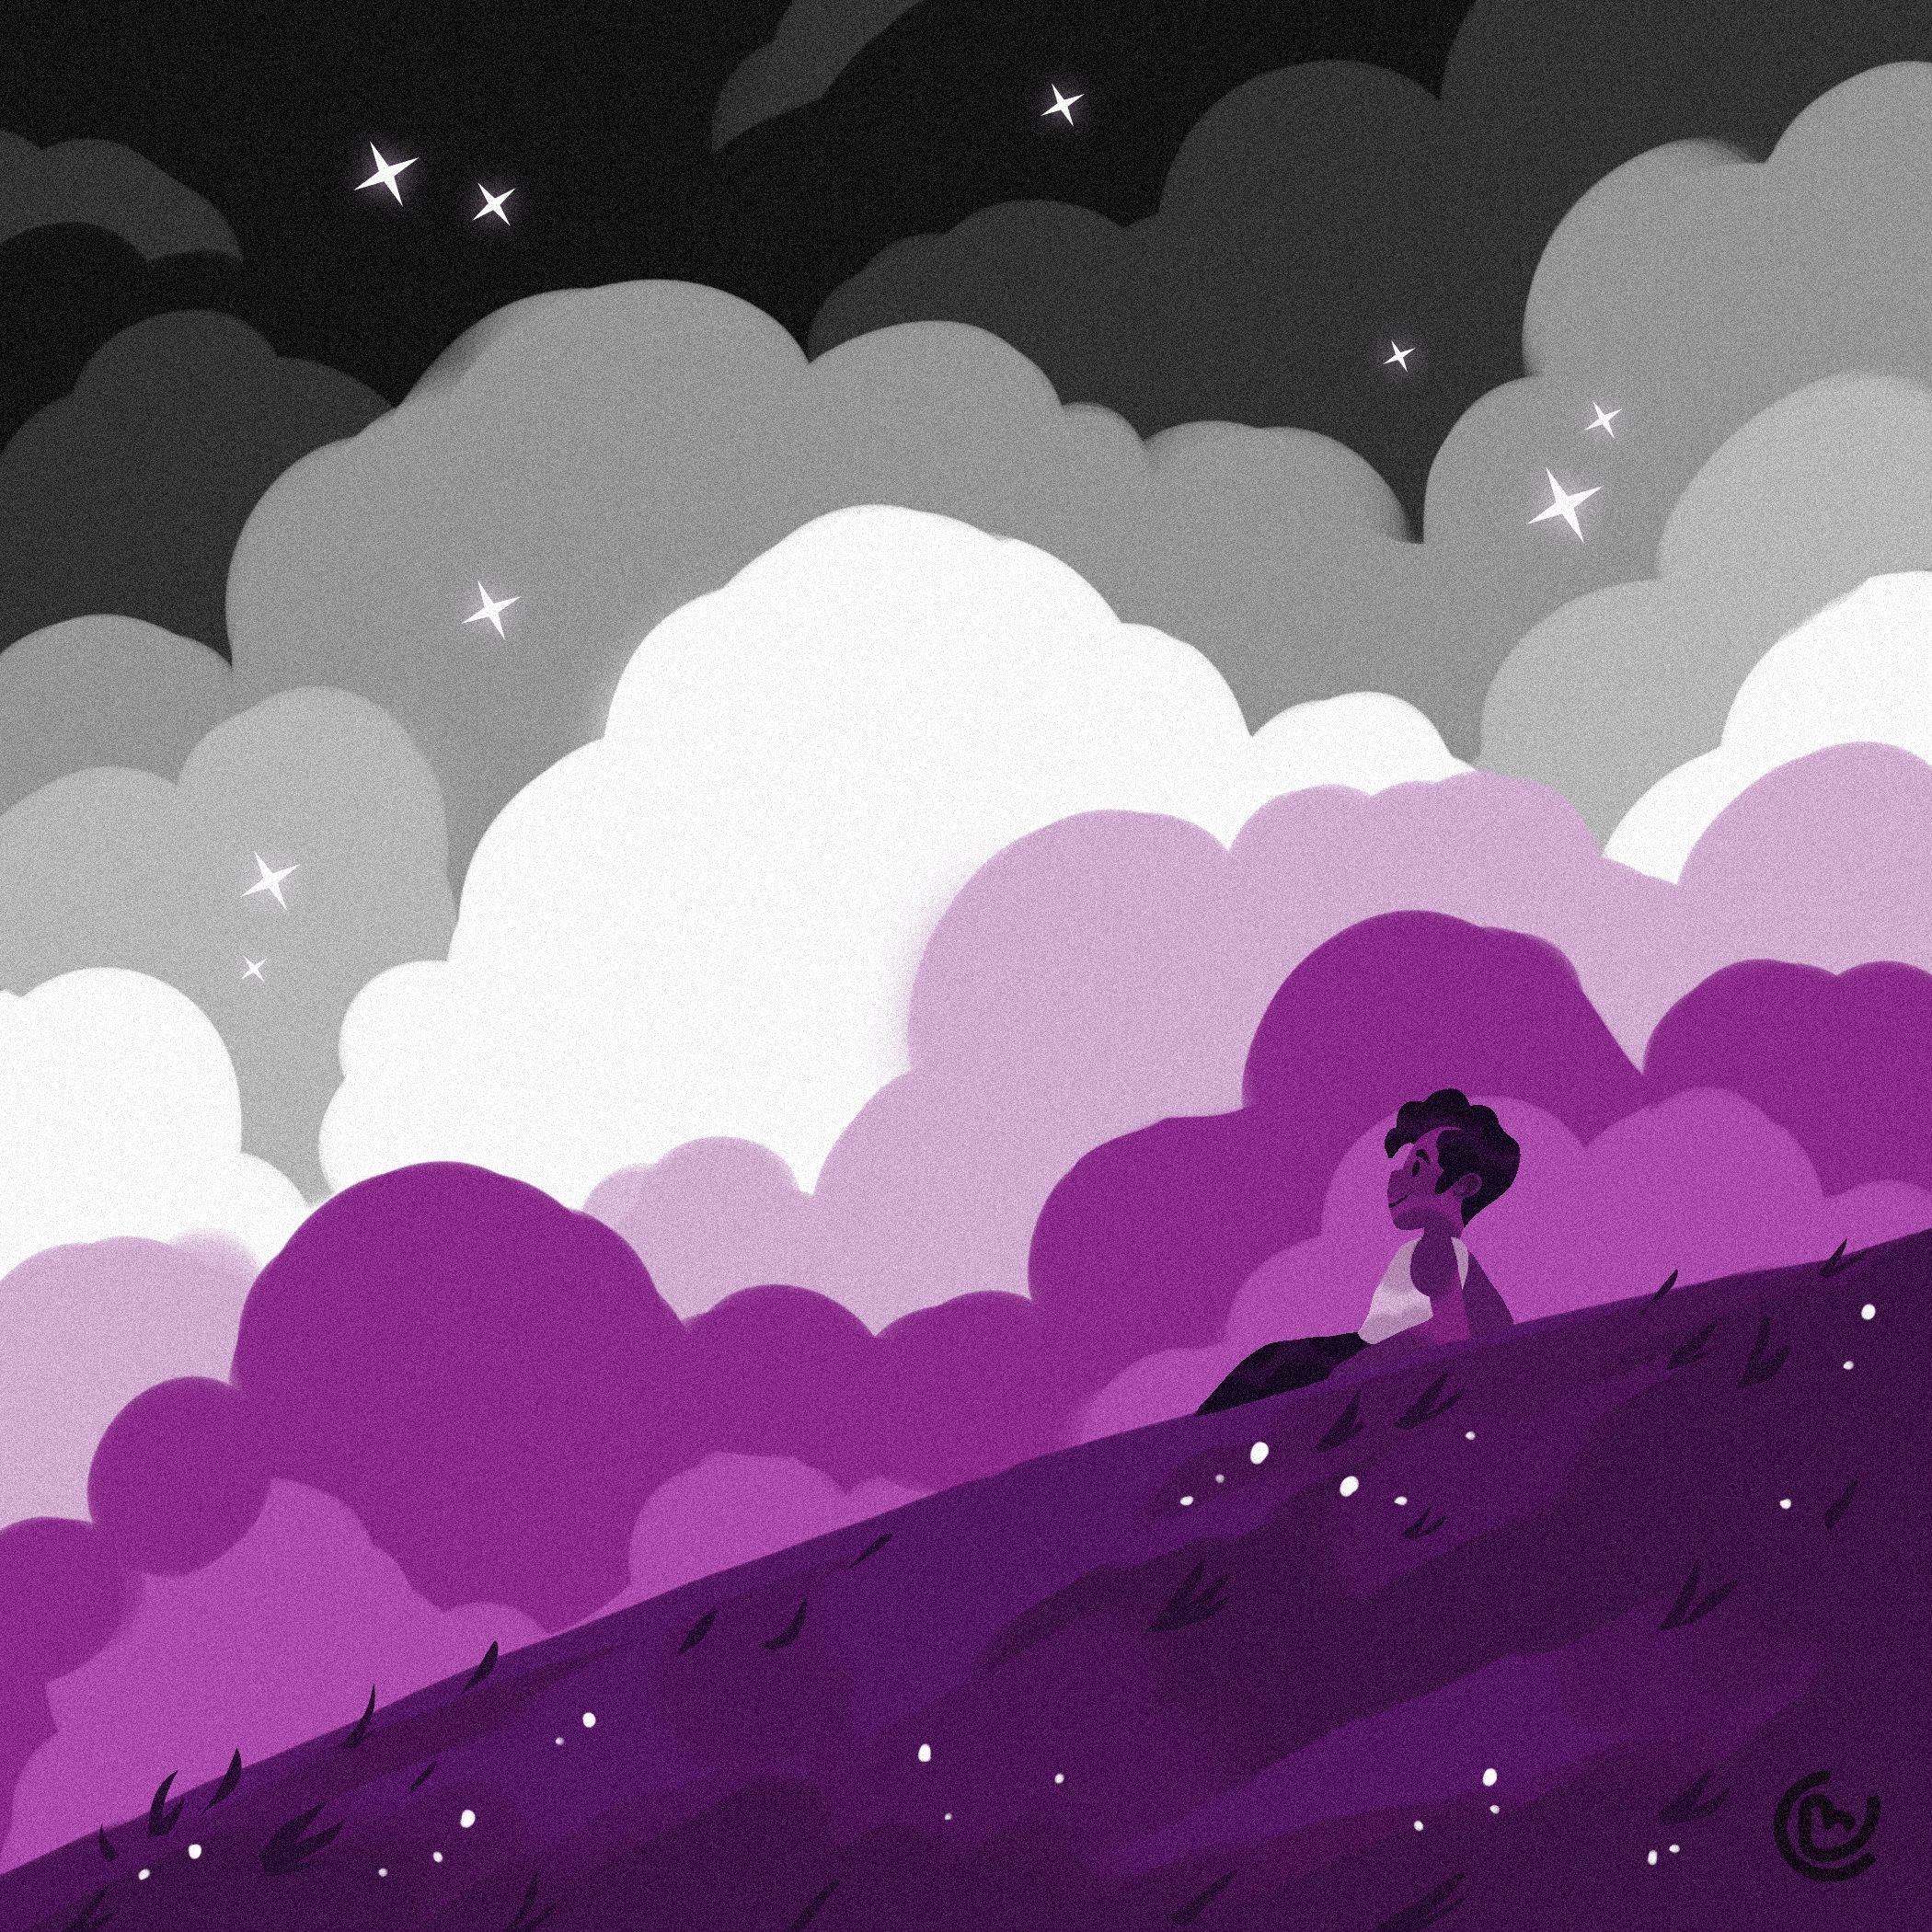 A digital illustration of a girl standing on a hill at night, looking up at the stars. - Asexual